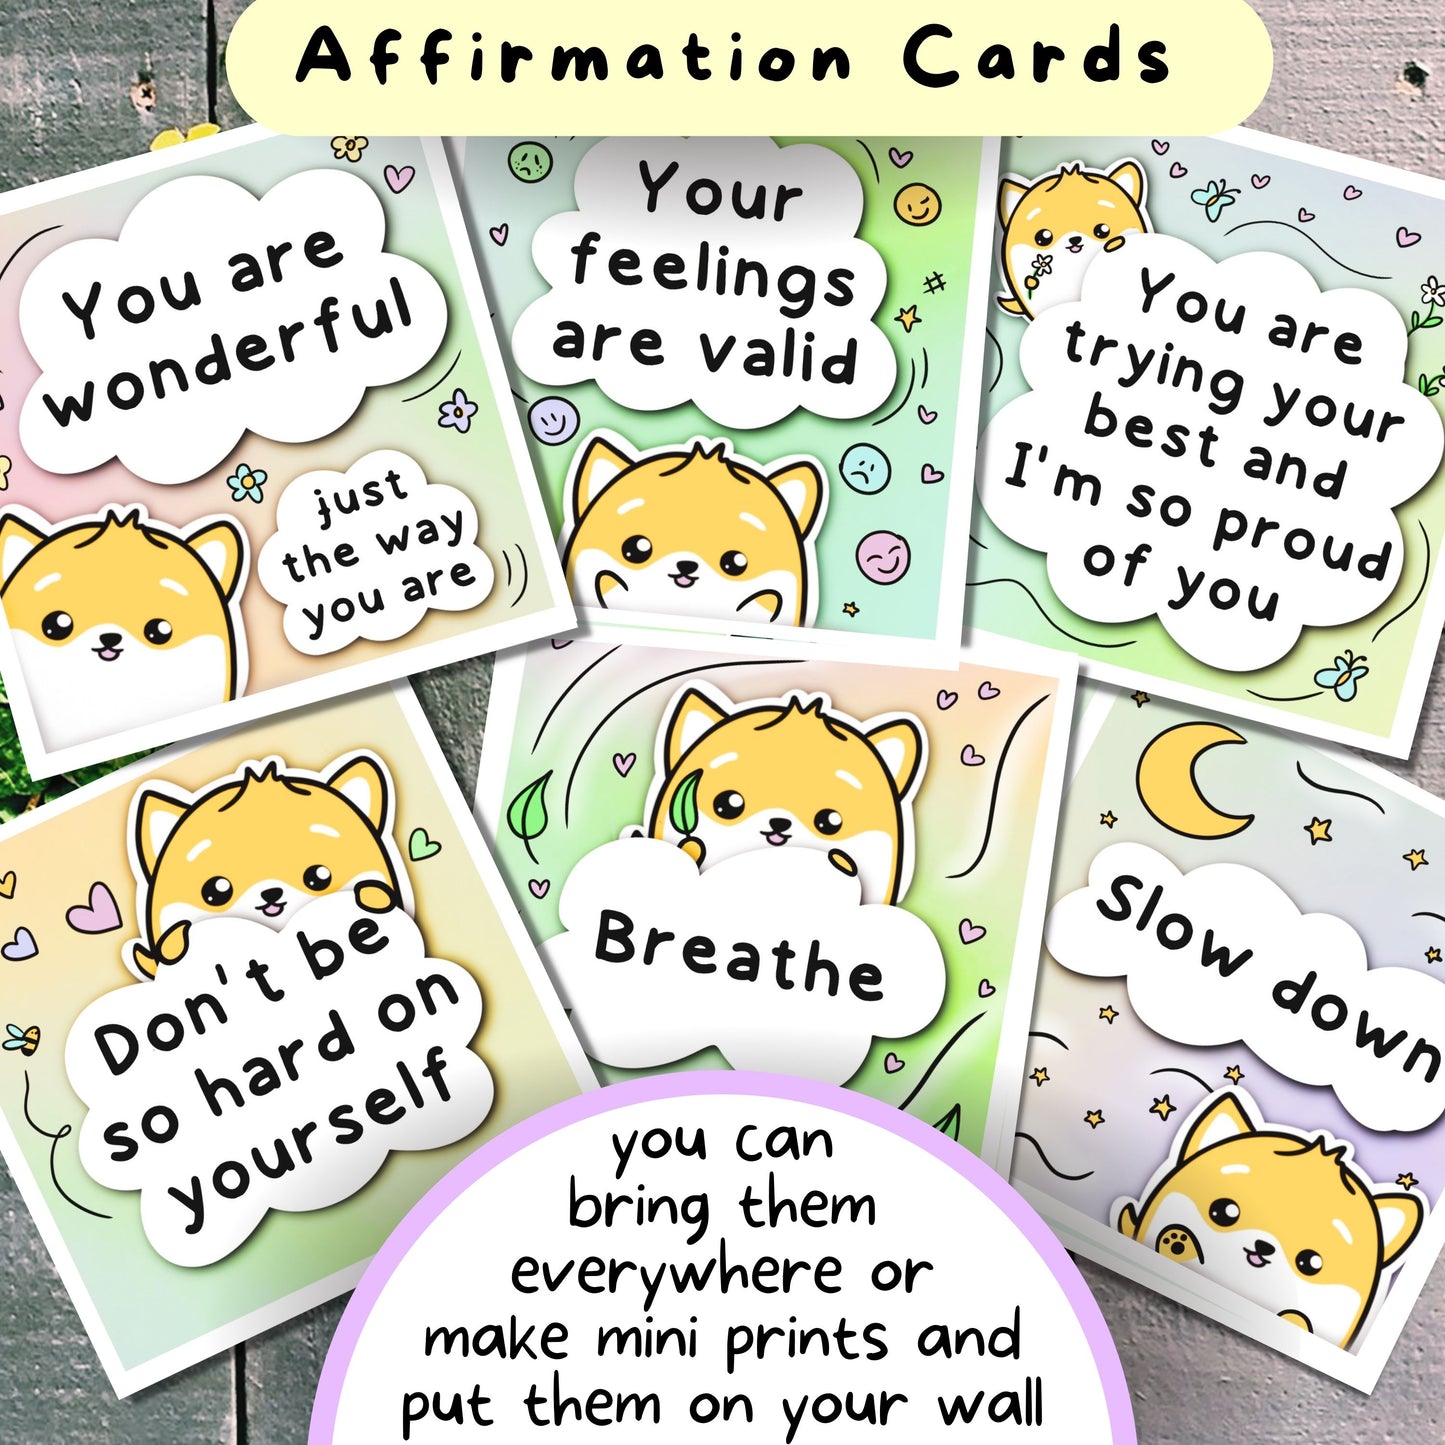 Communication Cards & Affirmation Cards (Digital) ft. Kifli, the Dog - Personal Use, by lil penguin studios